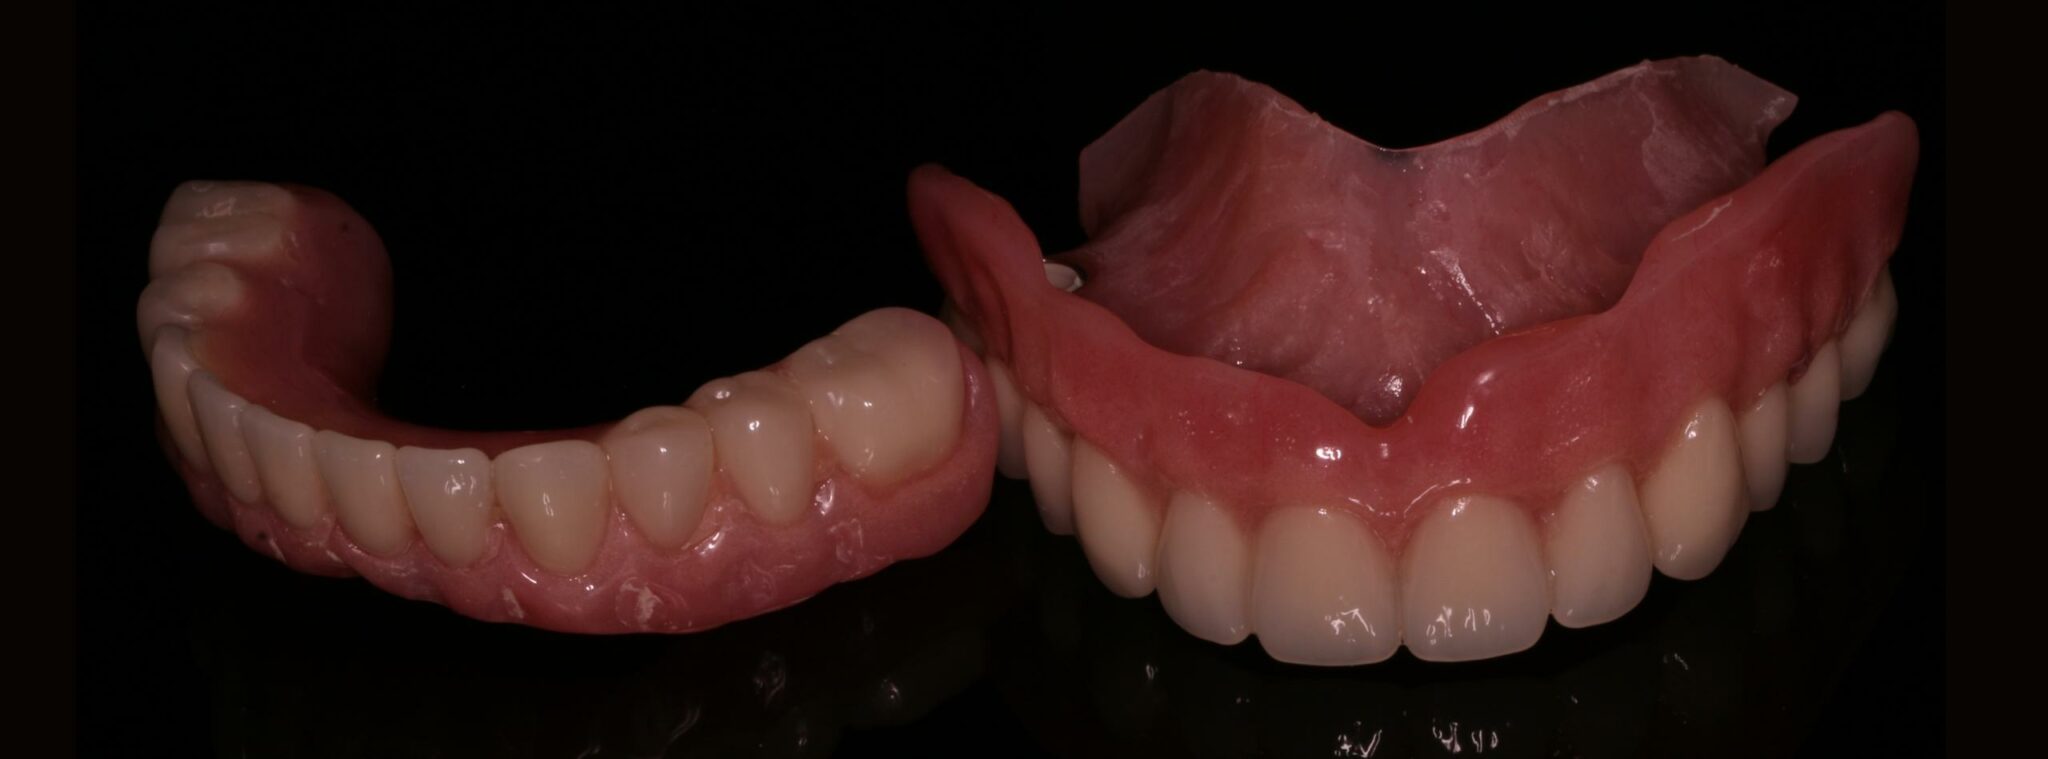 Implant Retained Dentures Leeds Dental Implant And Cosmetic Clinic By